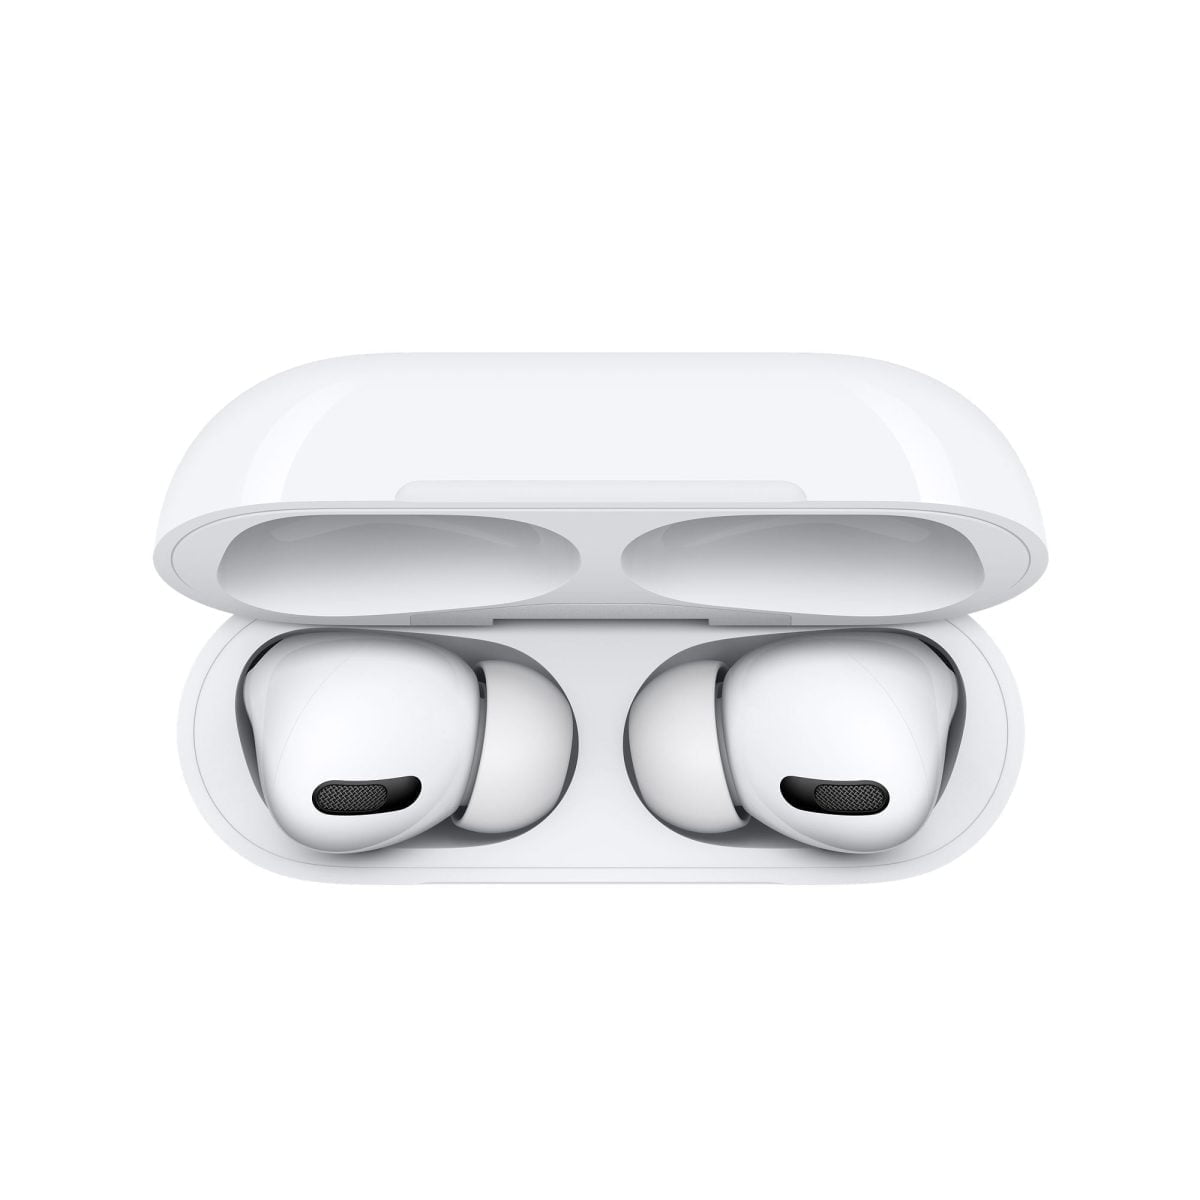 Airpods Pro Apple &Lt;Div Class=&Quot;Rc-Pdsection-Sidepanel Column Large-3 Small-12&Quot;&Gt; &Lt;H1&Gt;Apple Airpods Pro (With Magsafe Charging Case) - White&Lt;/H1&Gt; &Lt;/Div&Gt; &Lt;Div Class=&Quot;Rc-Pdsection-Mainpanel Column Large-9 Small-12&Quot;&Gt; &Lt;H4 Class=&Quot;H4-Para-Title&Quot;&Gt;Magic Like You’ve Never Heard&Lt;/H4&Gt; &Lt;Div Class=&Quot;Para-List As-Pdp-Lastparalist&Quot;&Gt; Airpods Pro Have Been Designed To Deliver Active Noise Cancellation For Immersive Sound, Transparency Mode So You Can Hear Your Surroundings, And A Customizable Fit For All-Day Comfort. Just Like Airpods, Airpods Pro Connect Magically To Your Apple Devices. And They’re Ready To Use Right Out Of The Case. &Lt;/Div&Gt; &Lt;/Div&Gt; Airpods Pro Apple Airpods Pro (With Magsafe Charging Case) - White Mlwk3